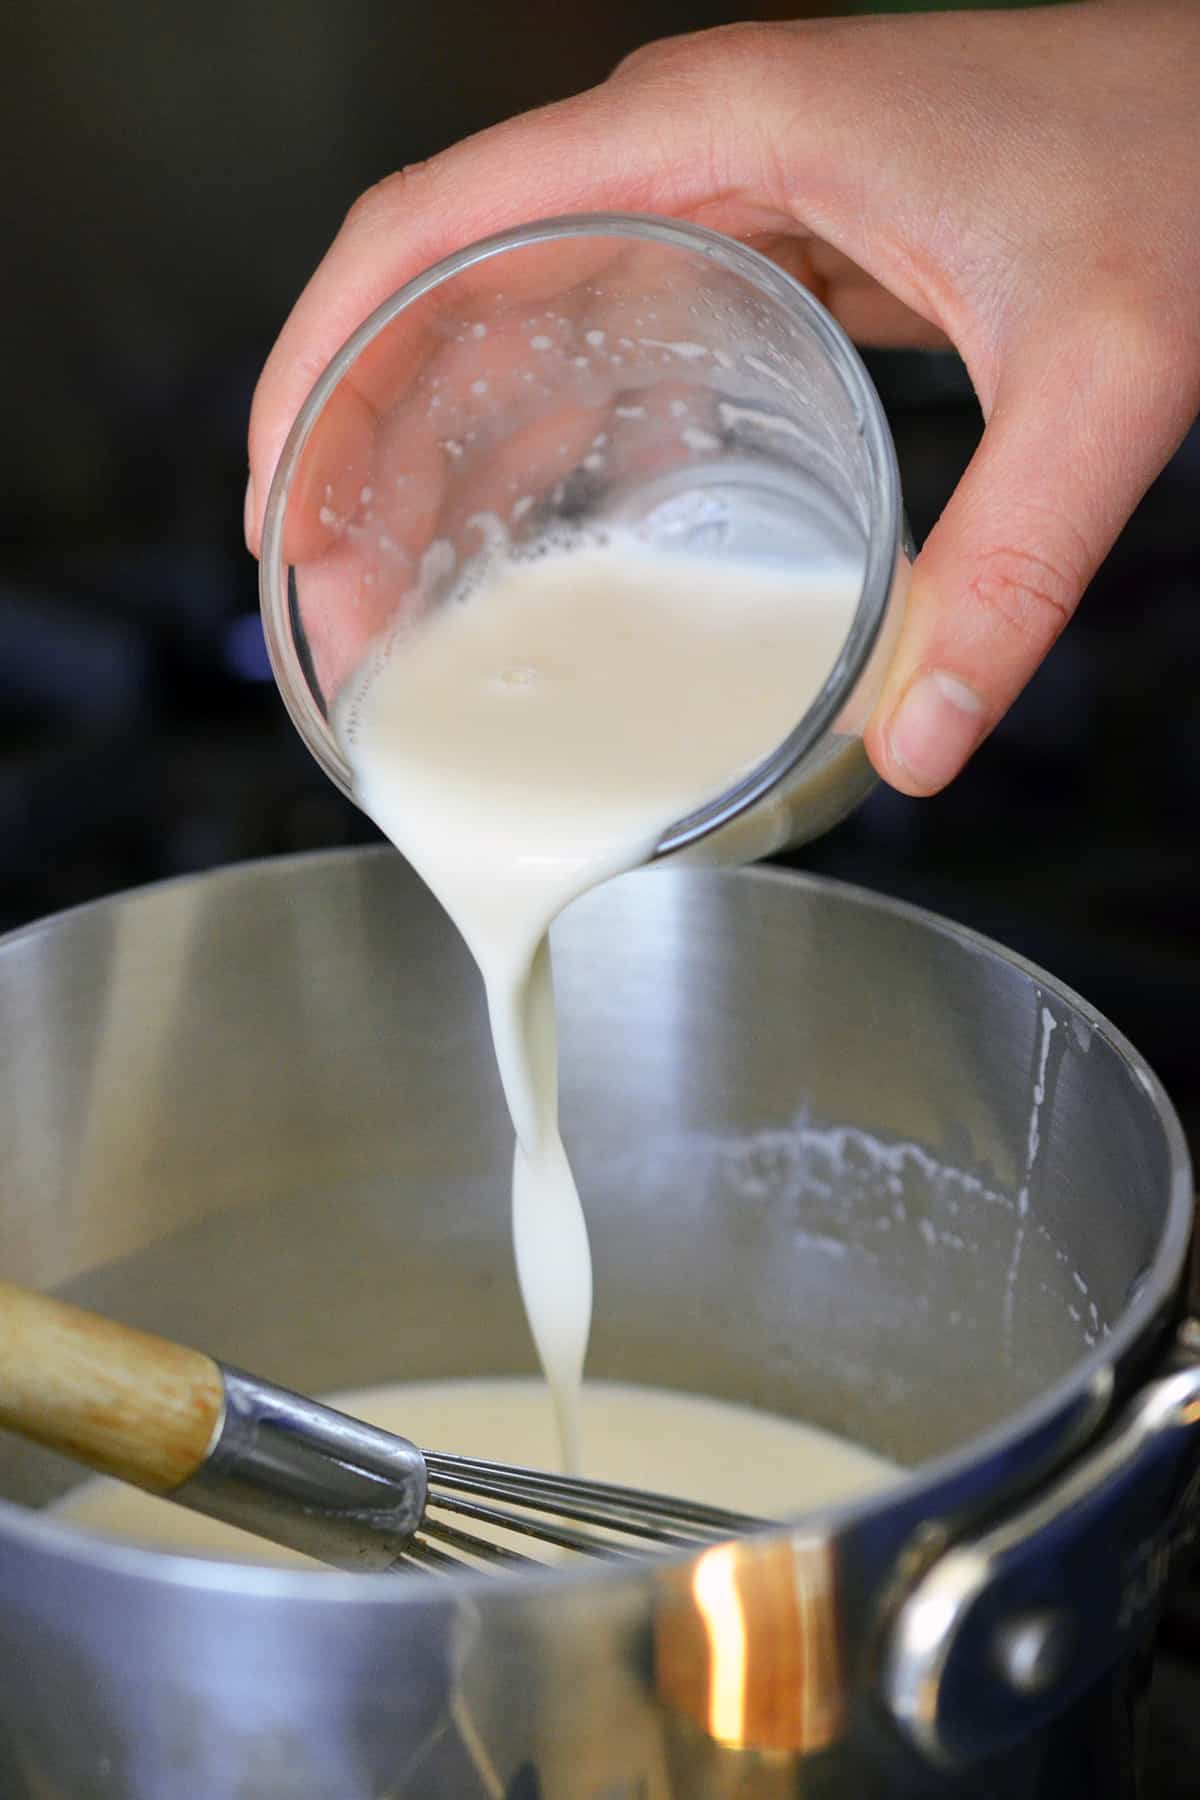 Pouring some diluted gelatin into a saucepan to make Panna Cotta.